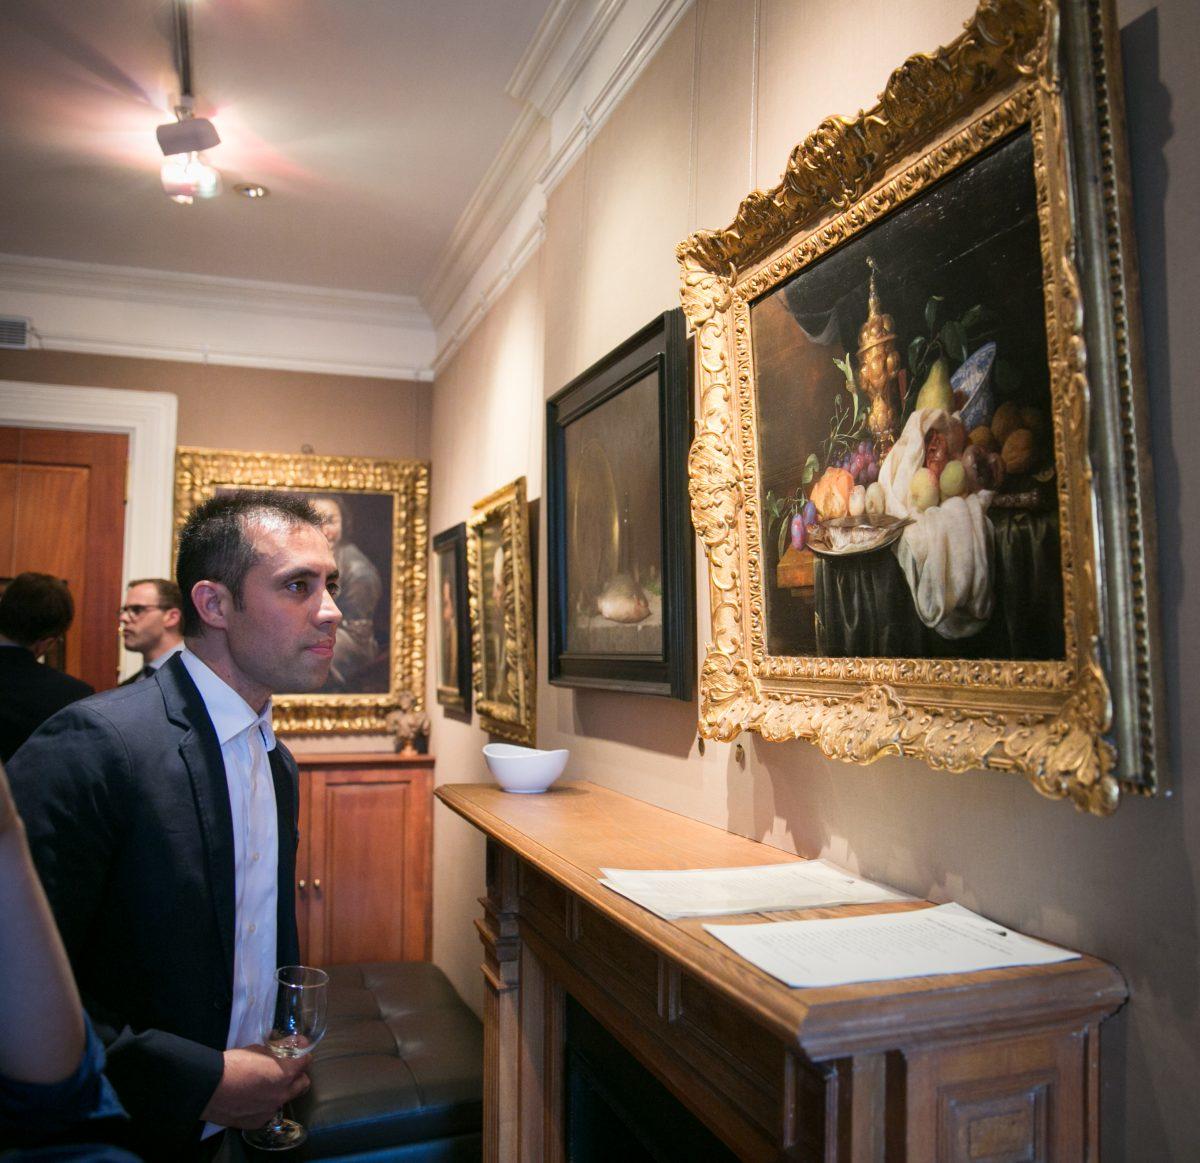 Artist and co-curator of the exhibition, Anthony Baus looks at a still life by Joris van Son (b. 1623), which hangs next to "Sea Bass" by Justin Wood (b. 1982), at the opening of "The Unbroken Line" in the Robert Simon Fine Art gallery on May 10, 2018. (Milene Fernandez/The Epoch Times)